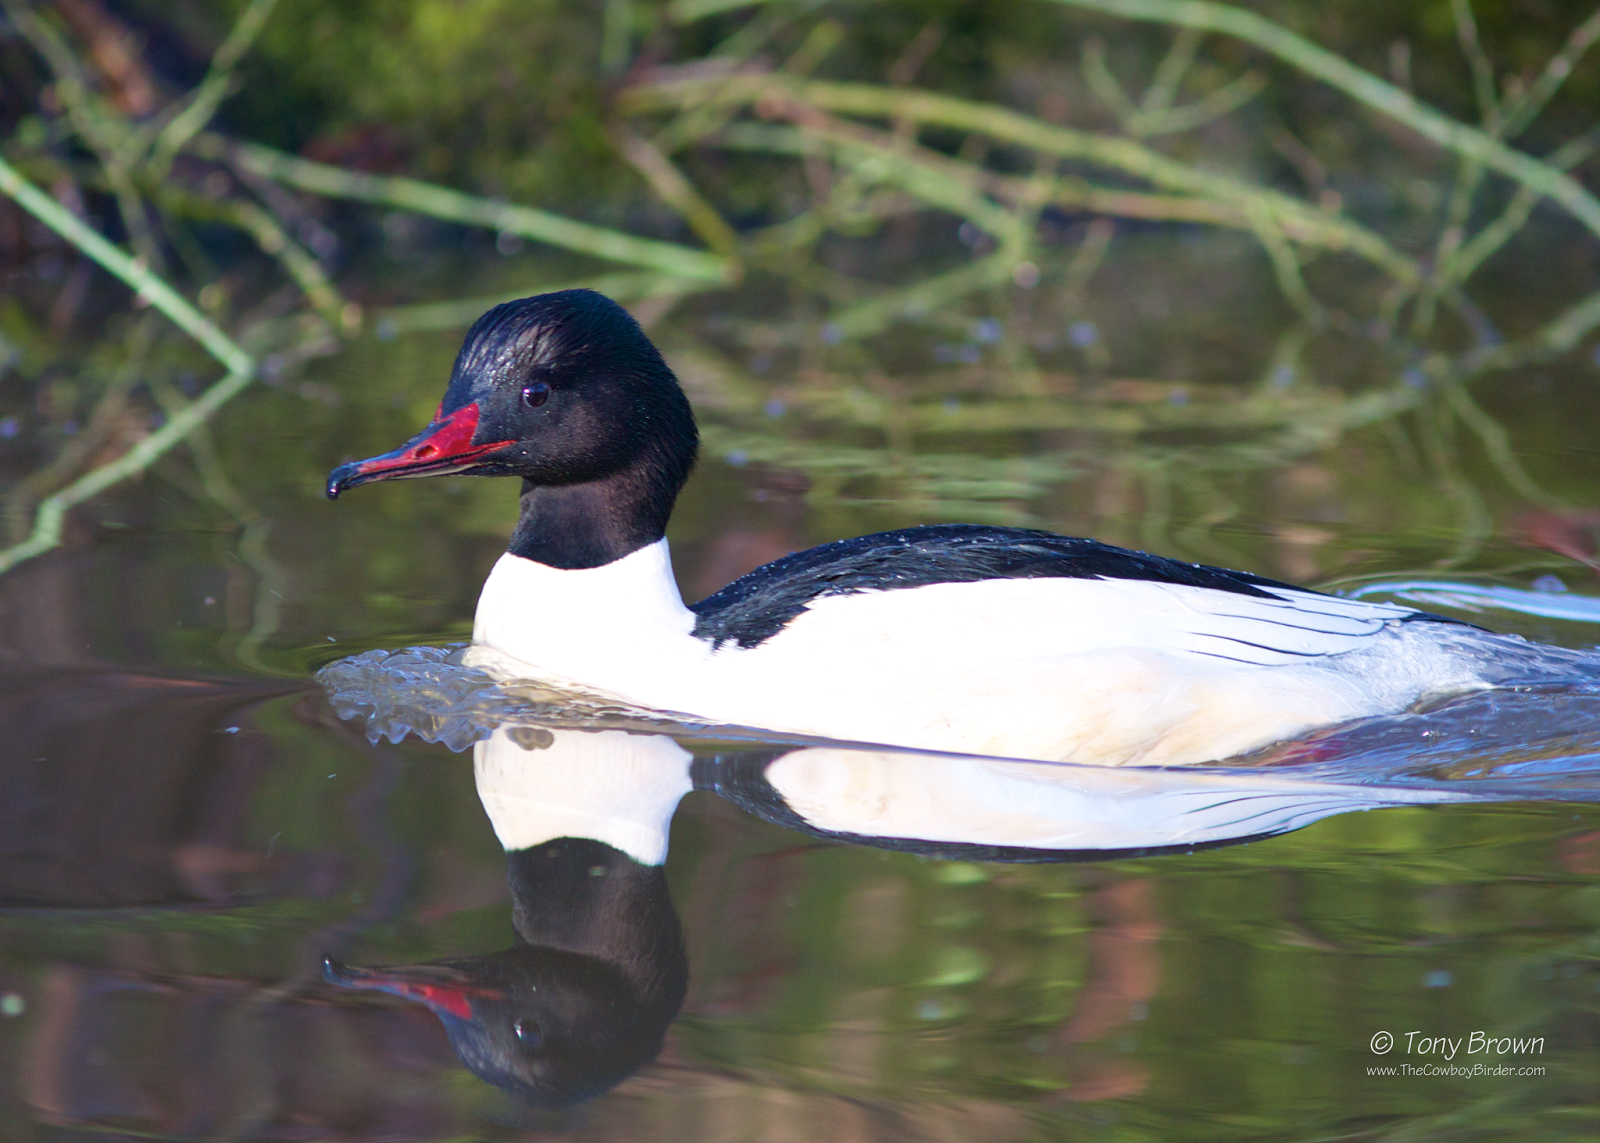 Male, Connaught Water, Epping Forest